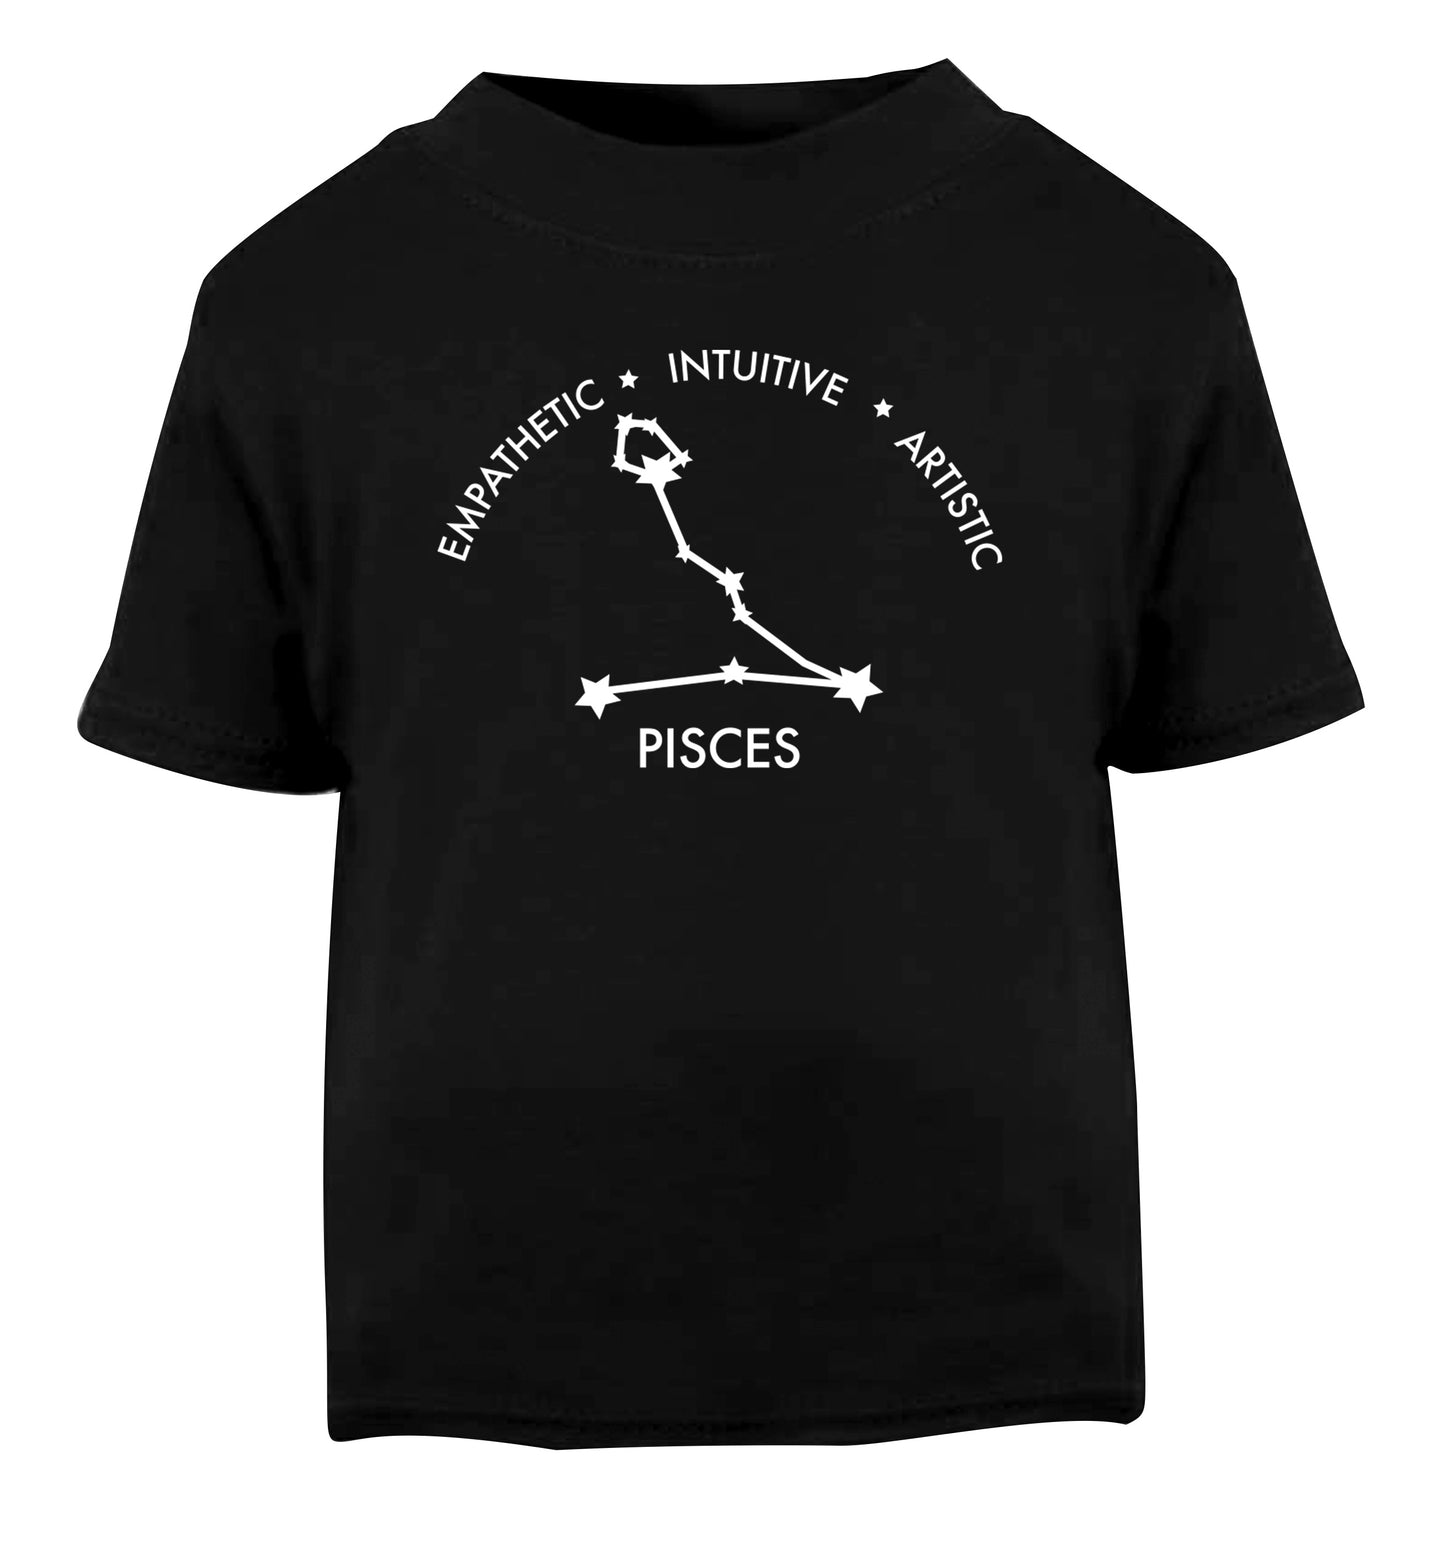 Pisces: Empathetic | Intuitive | Artistic Black Baby Toddler Tshirt 2 years